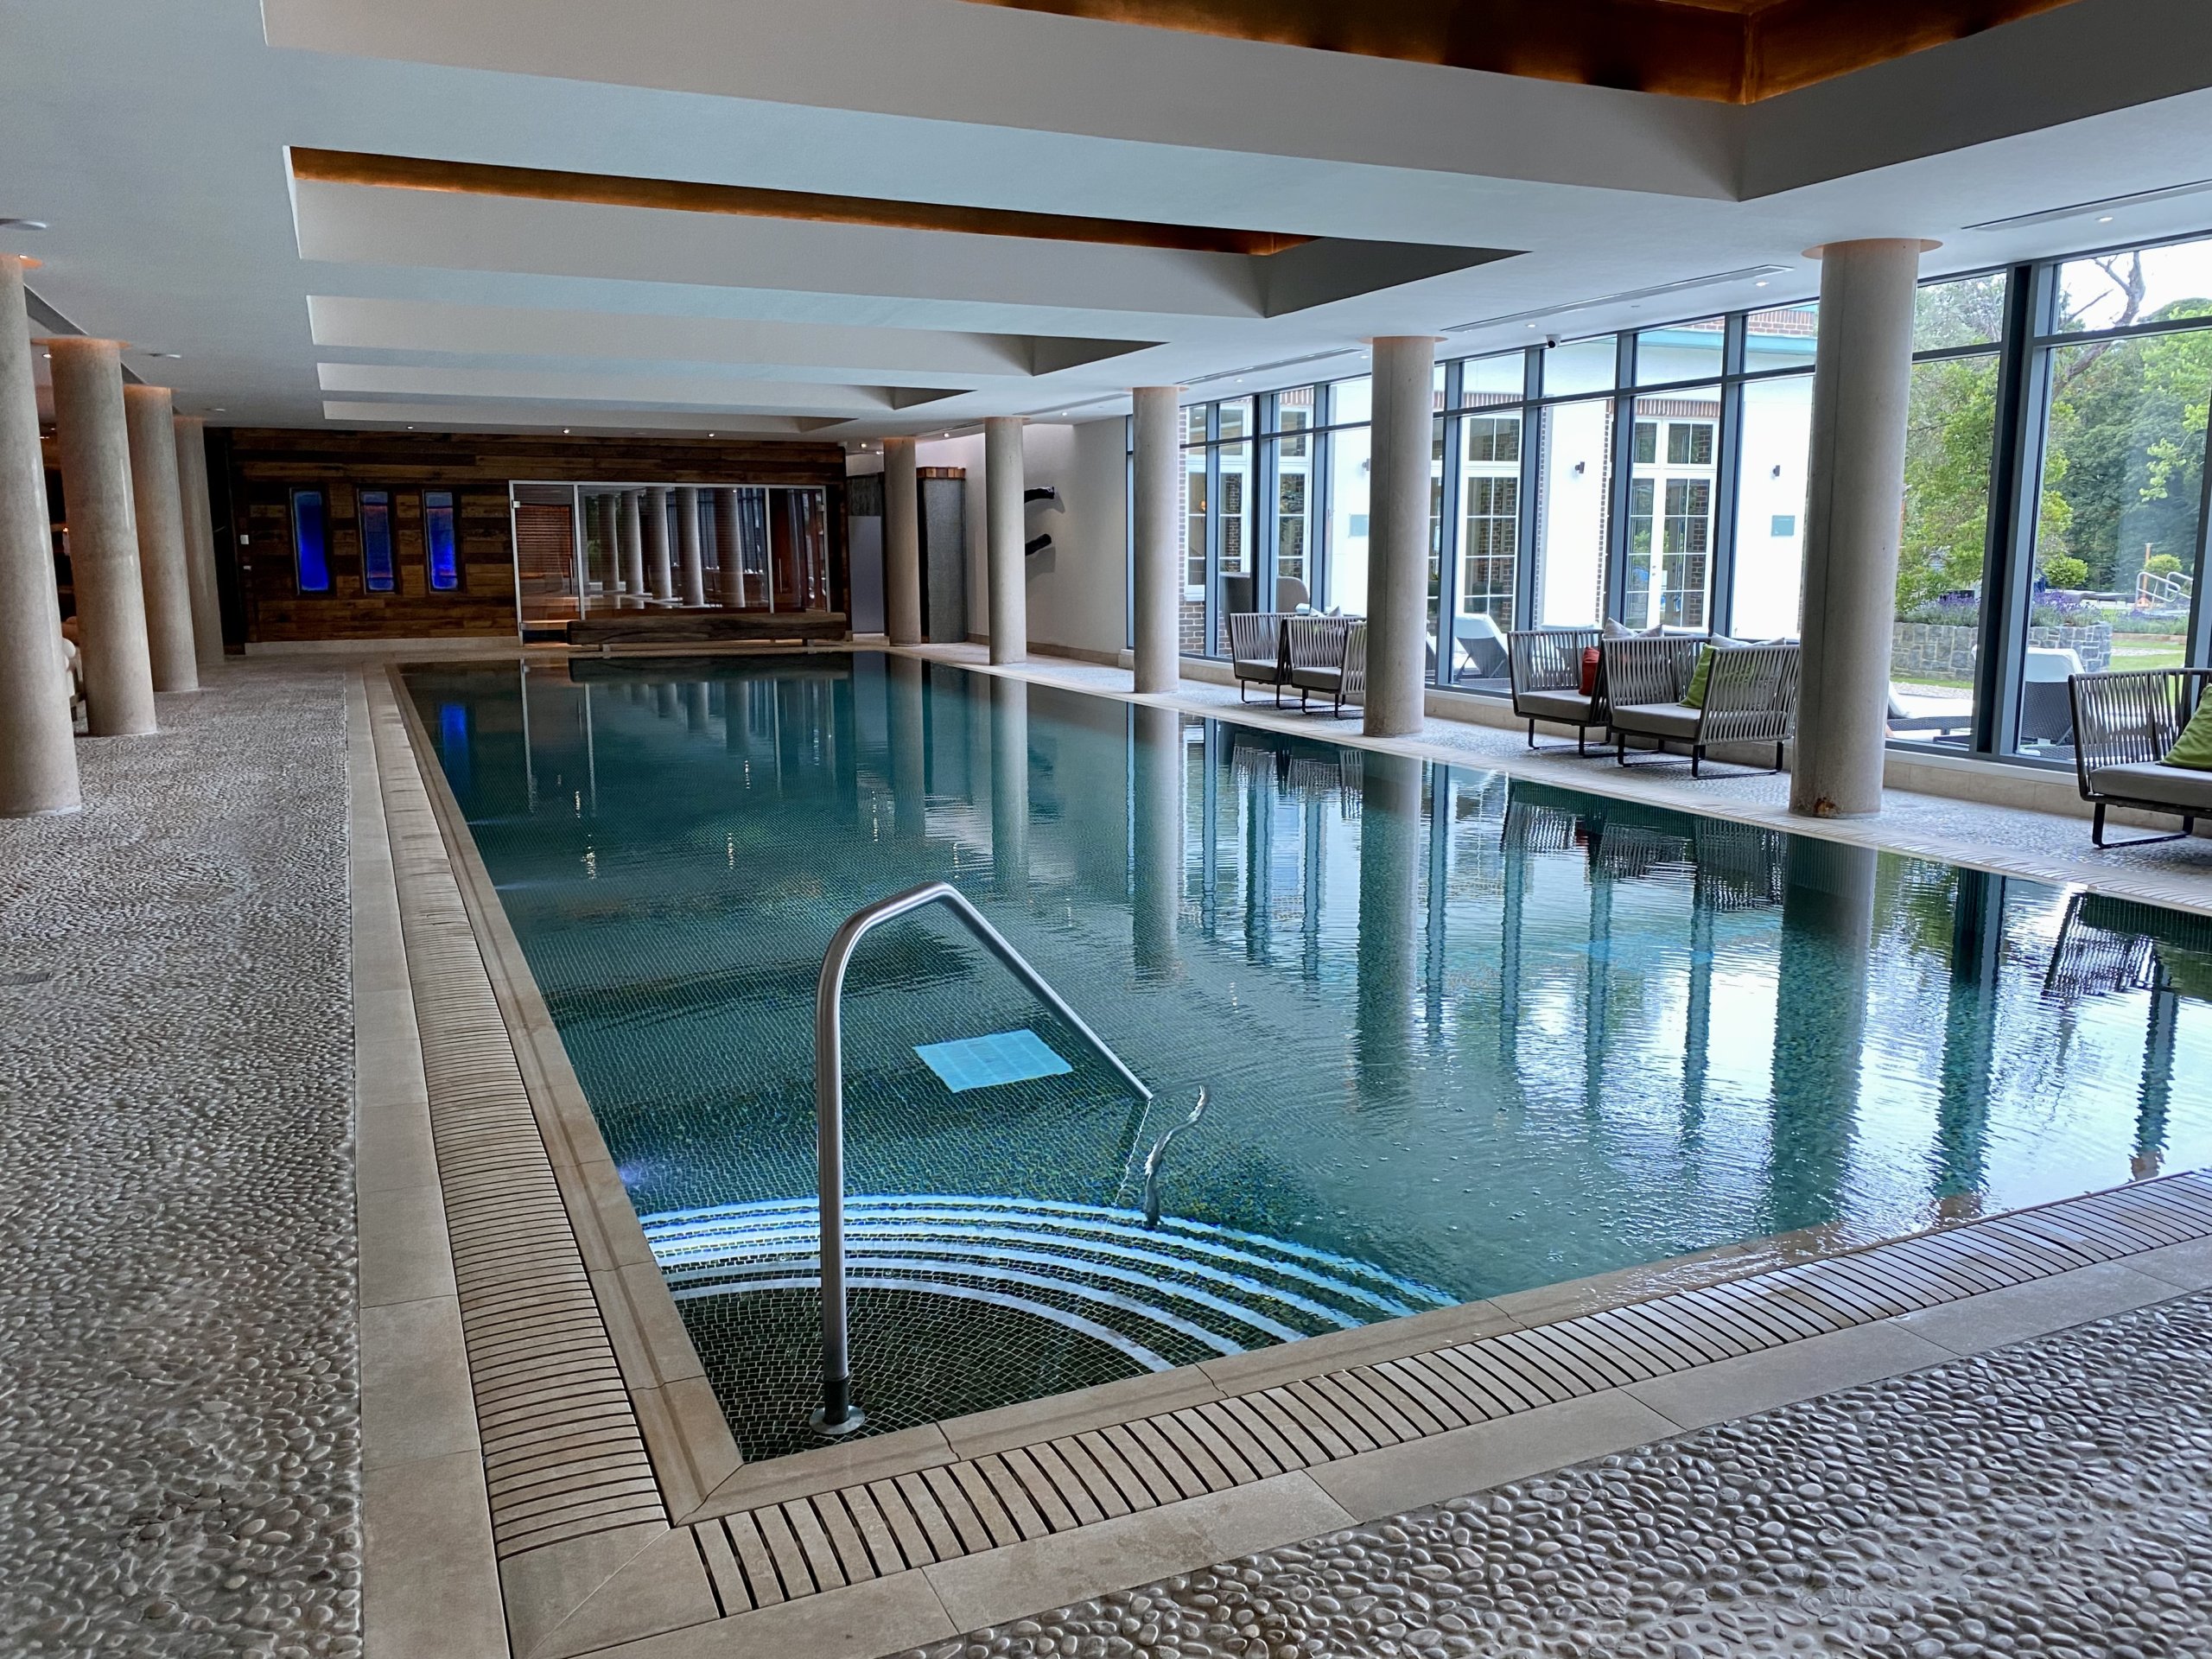 Galgorm Hotel & Spa Thermal Village indoor swimming pool in Ireland for golf vacations